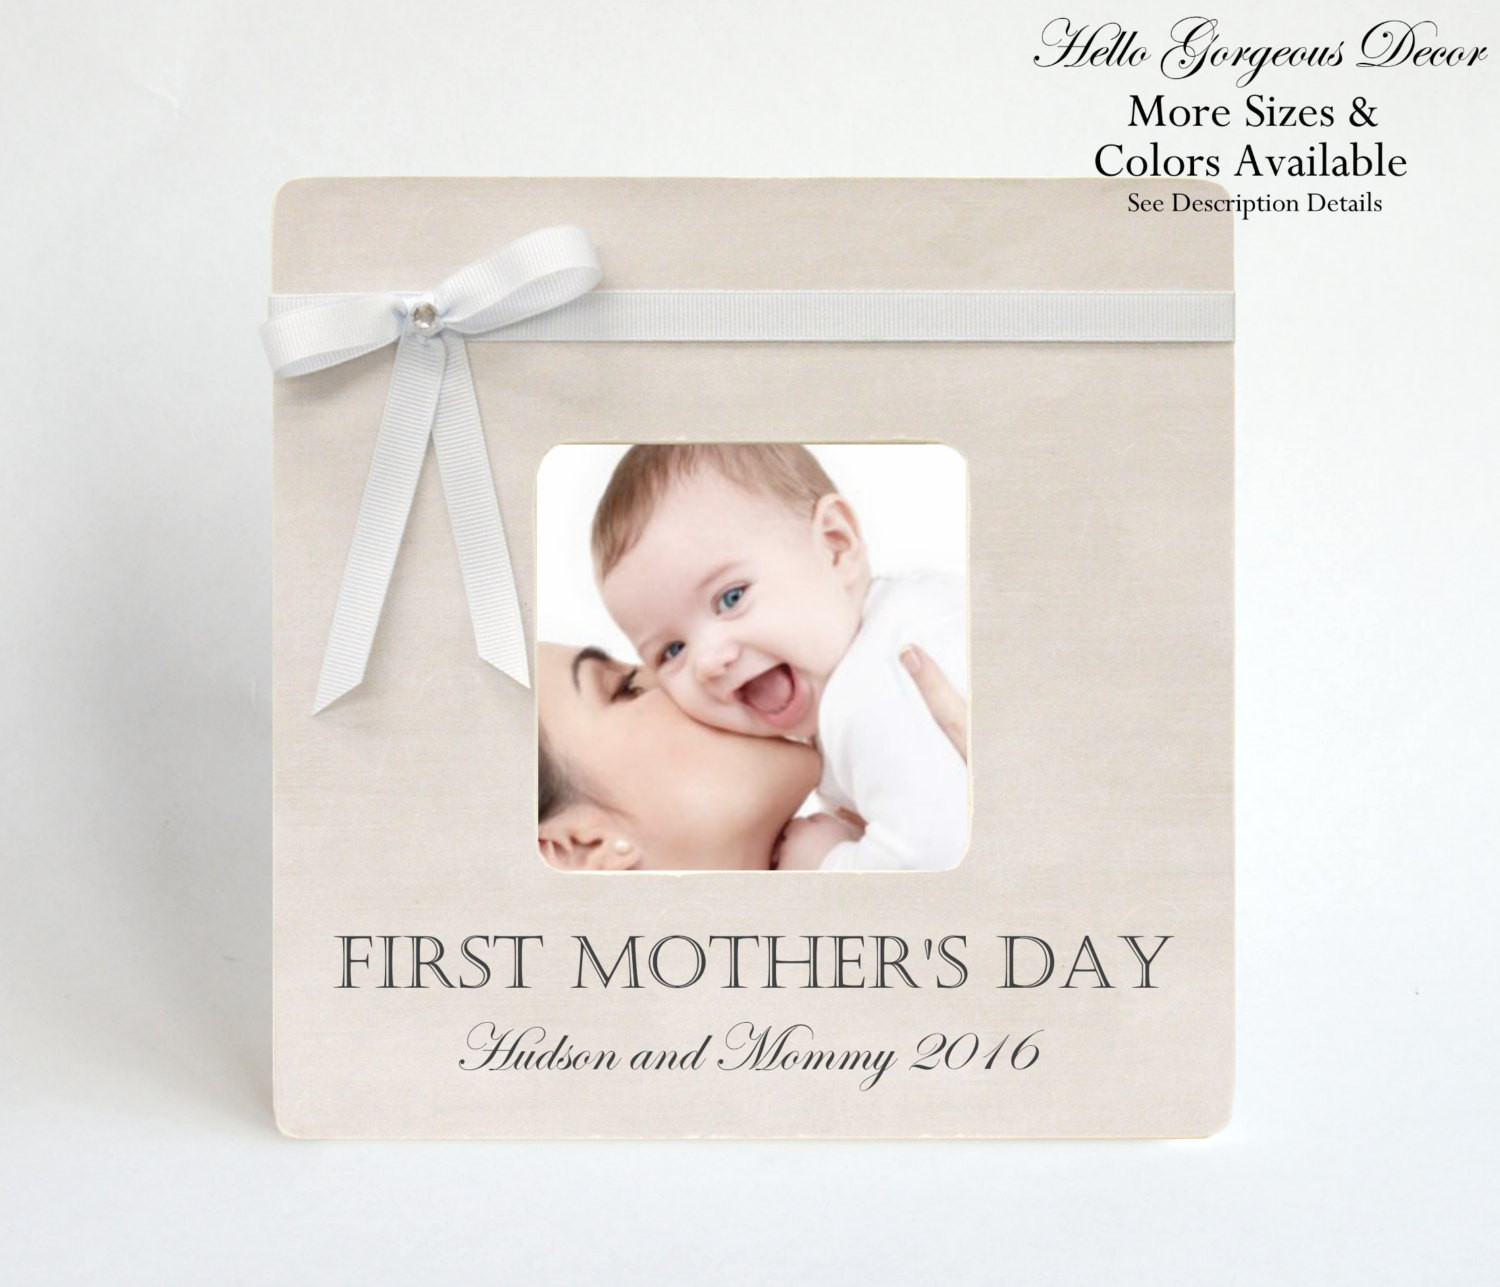 Moms First Mothers Day Gift Ideas
 Mother s Day Gift FIRST MOTHER S DAY Picture Frame To